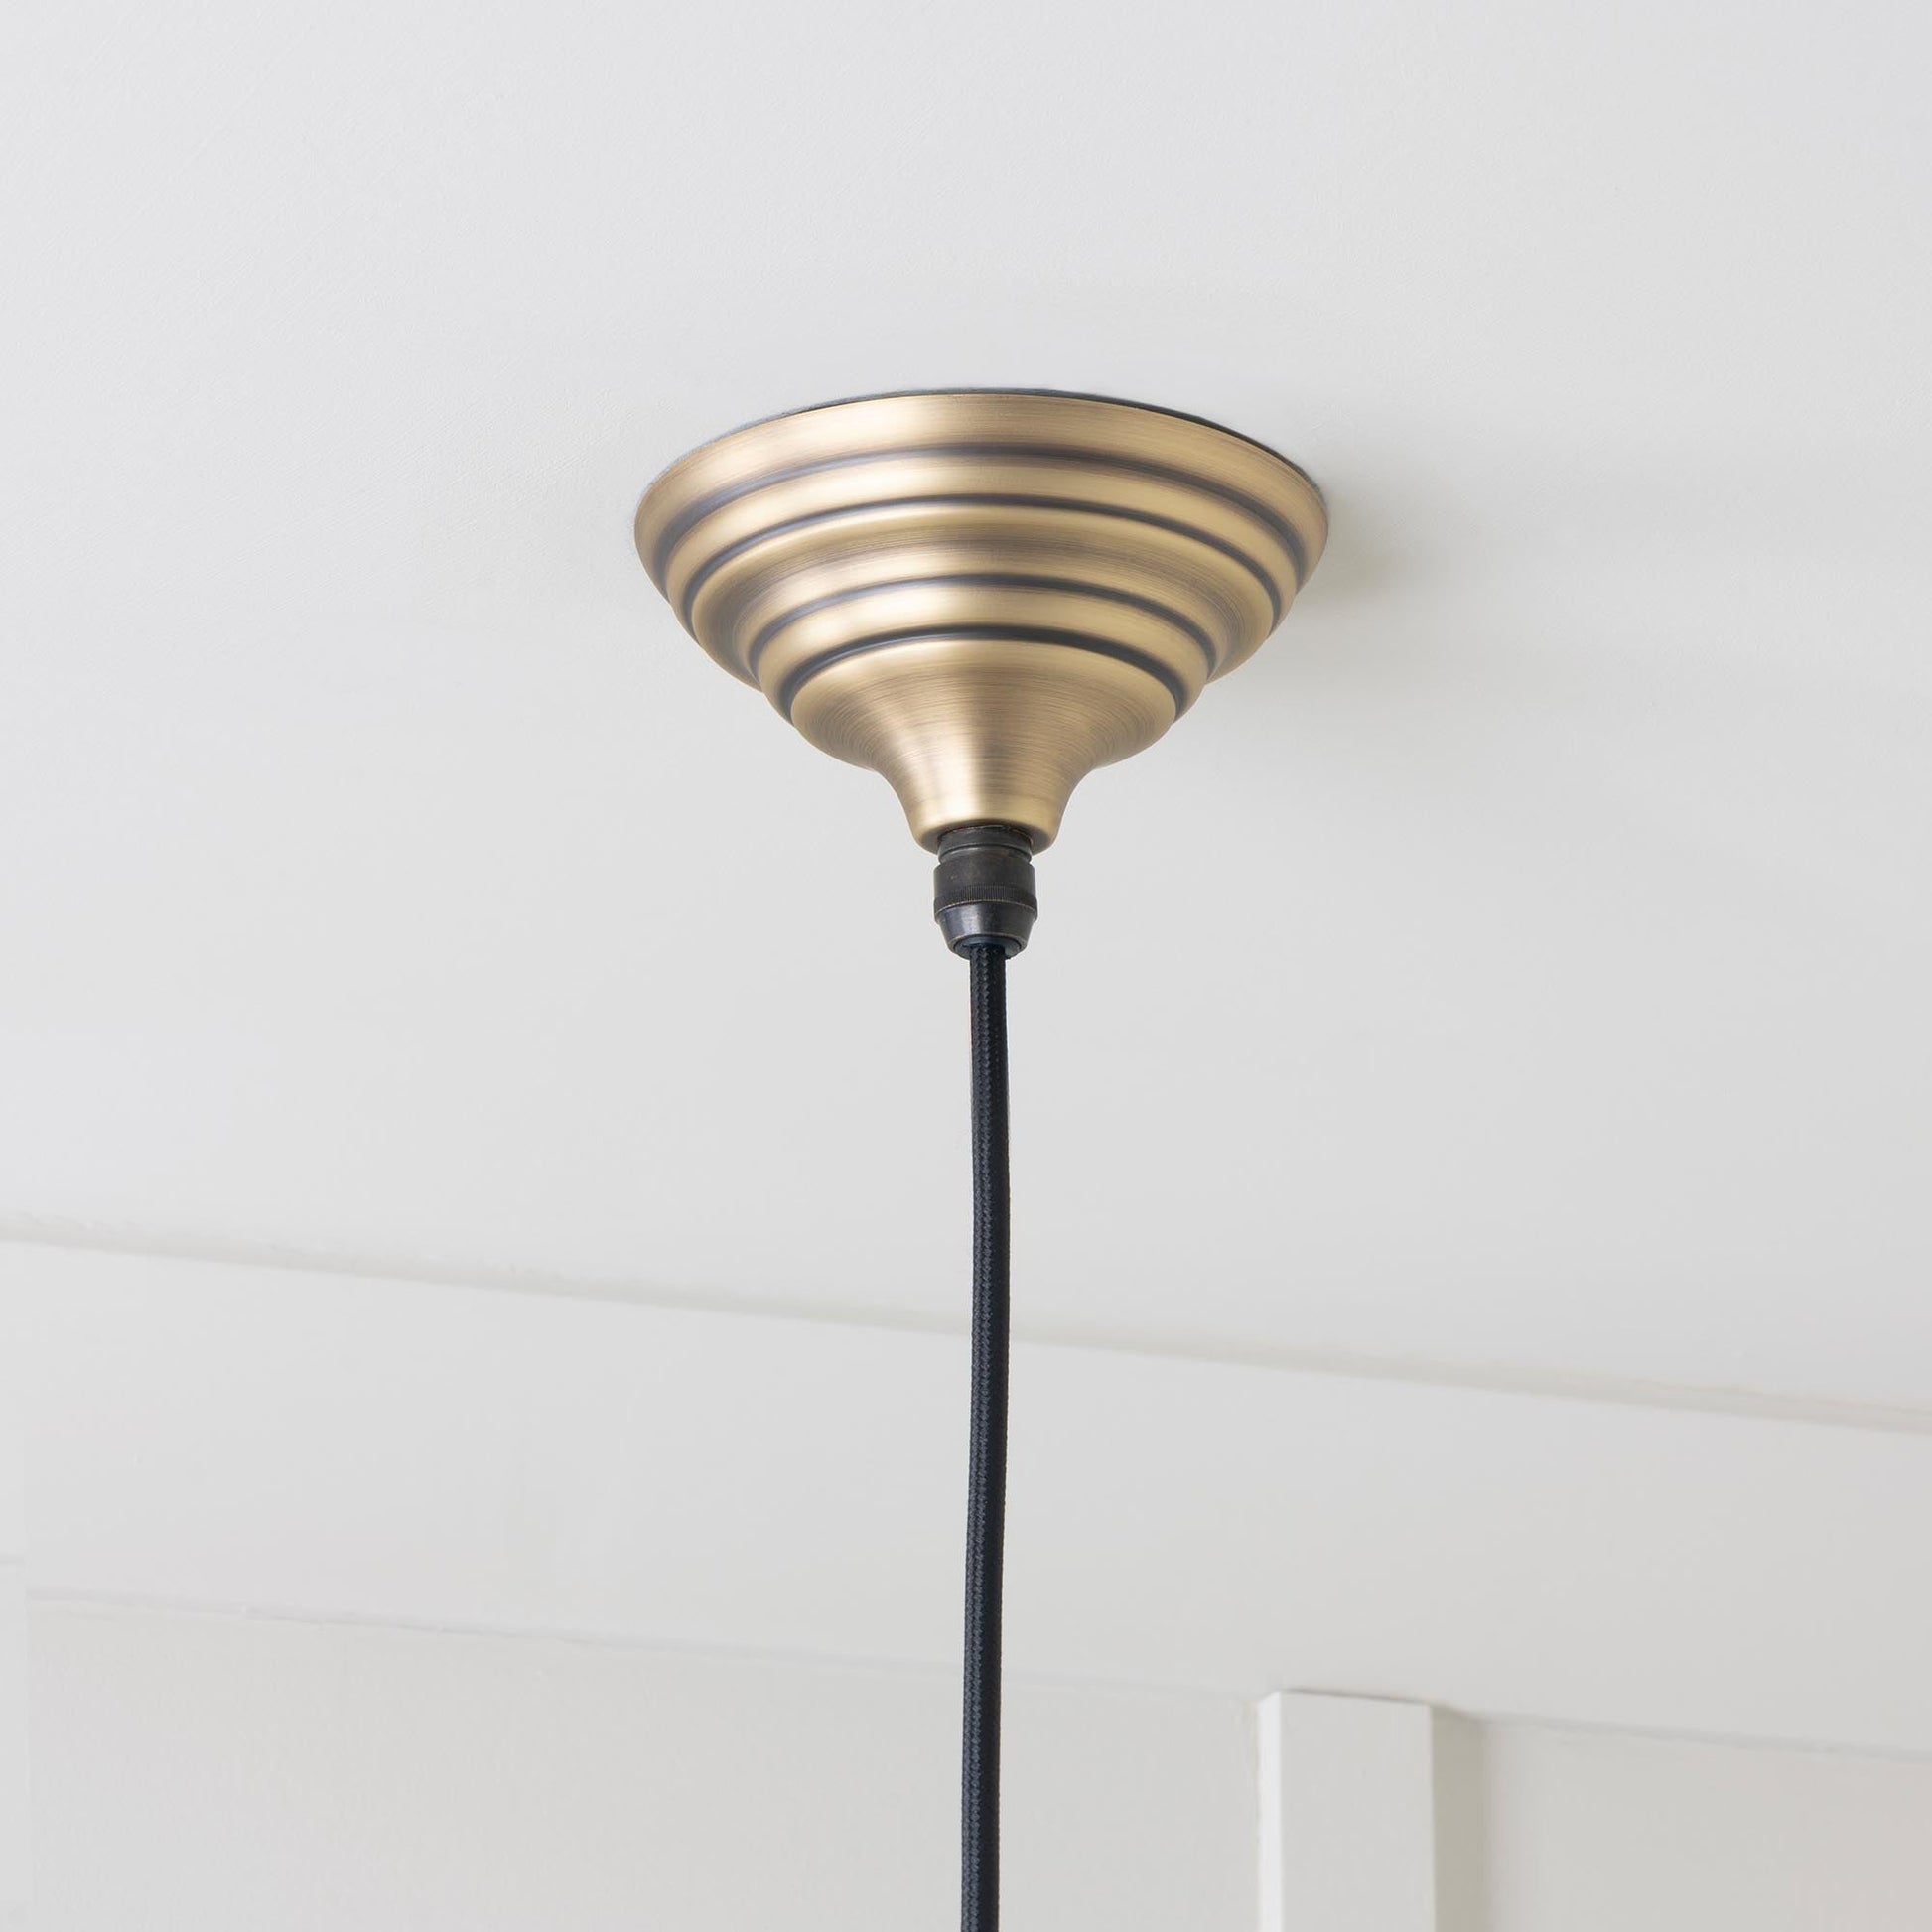 Aged Brass Hockley Pendant Light, close up view of fitting and cable.